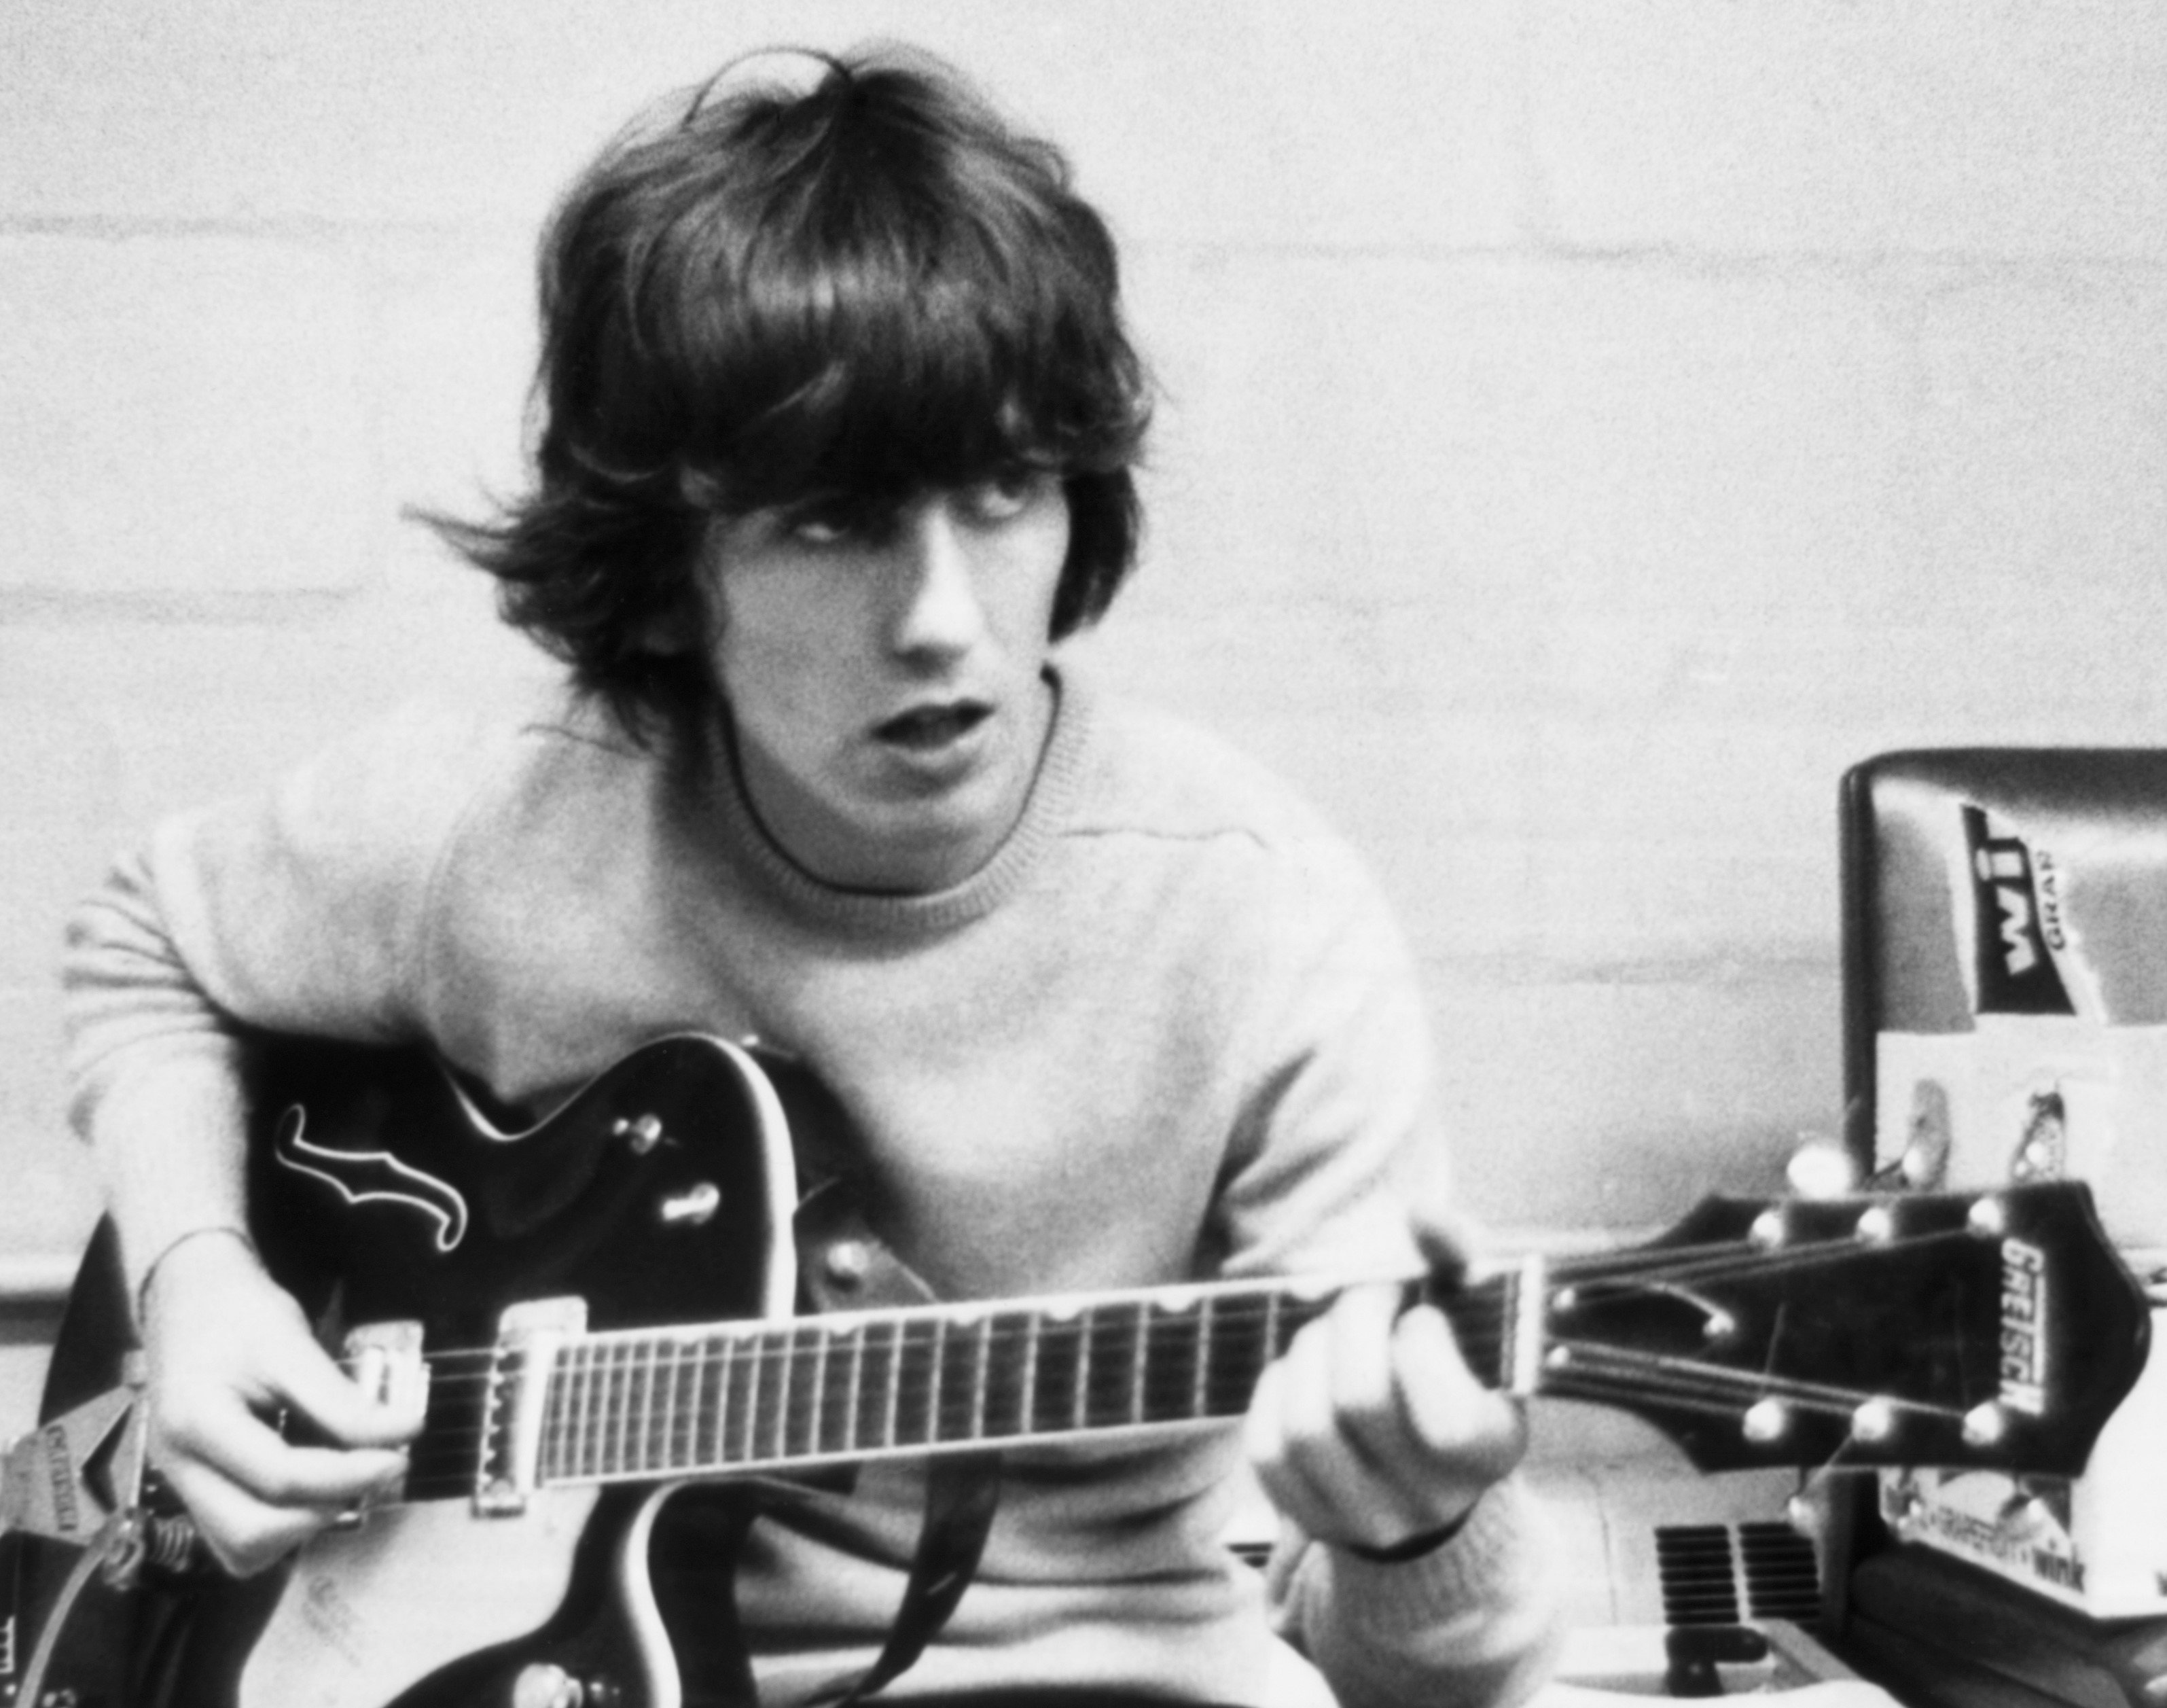 A black and white picture of George Harrison sitting and holding a guitar.